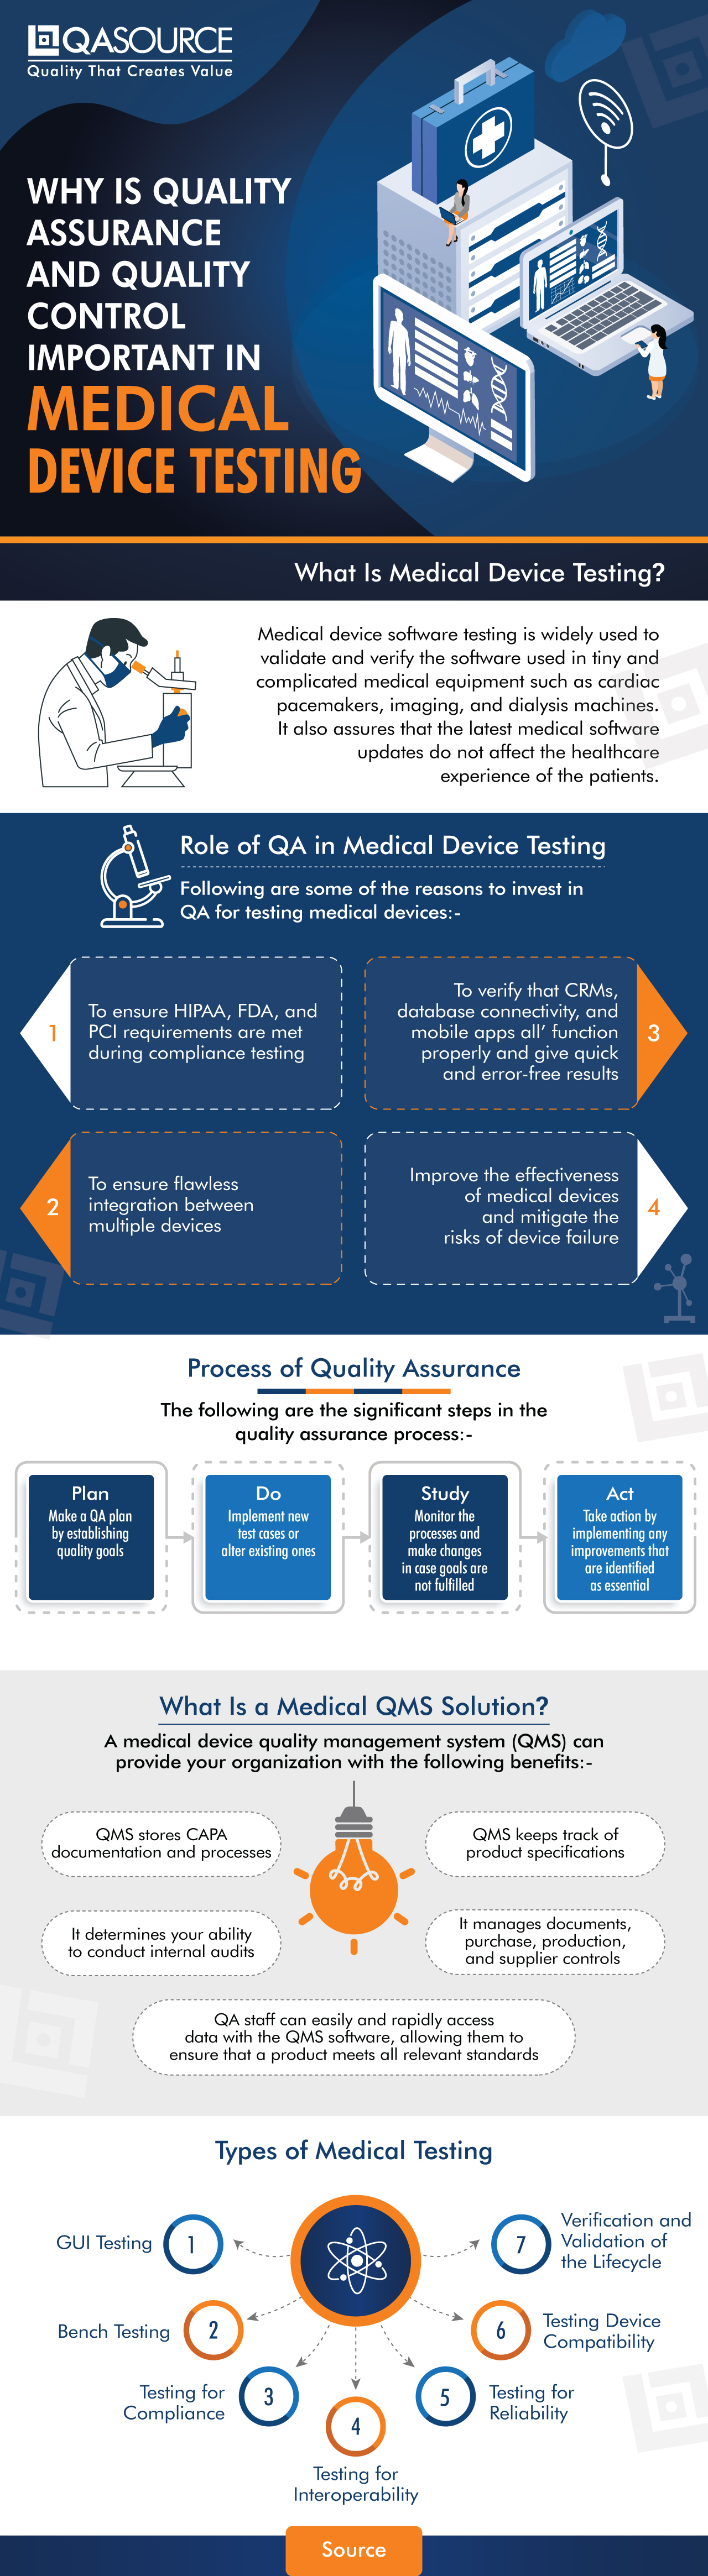 Why is Quality Assurance and Quality Control Important in Medical Device Testing  (Infographic)